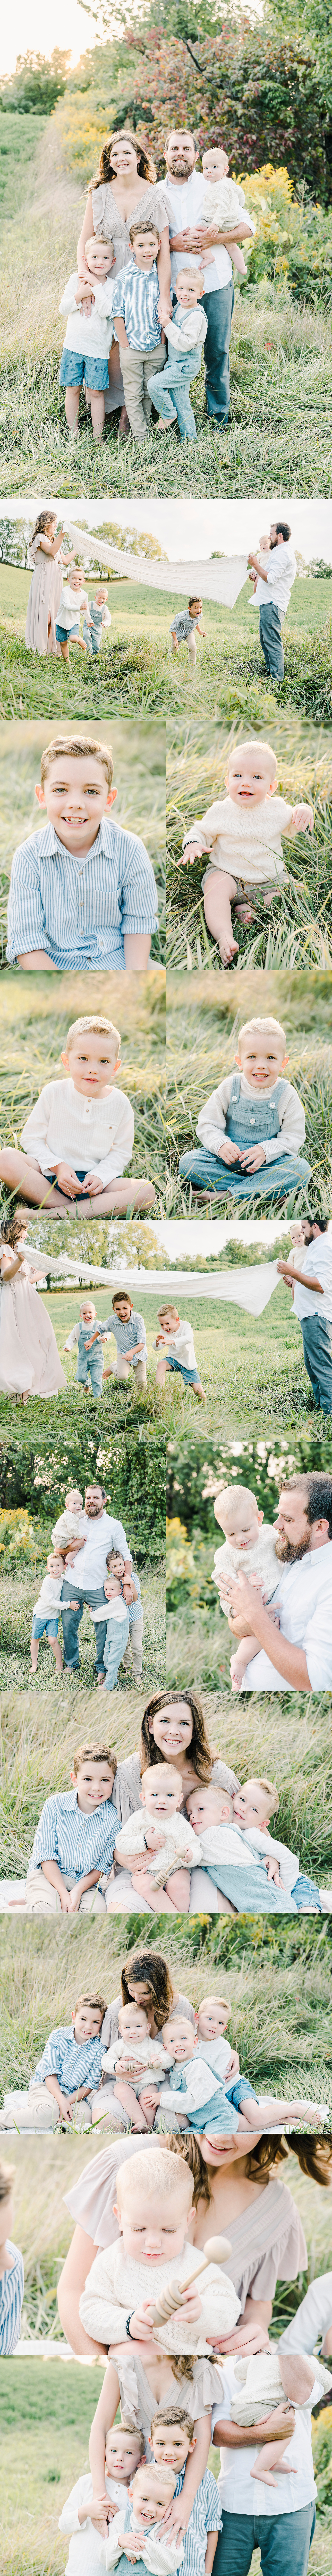 family session in field at sunset